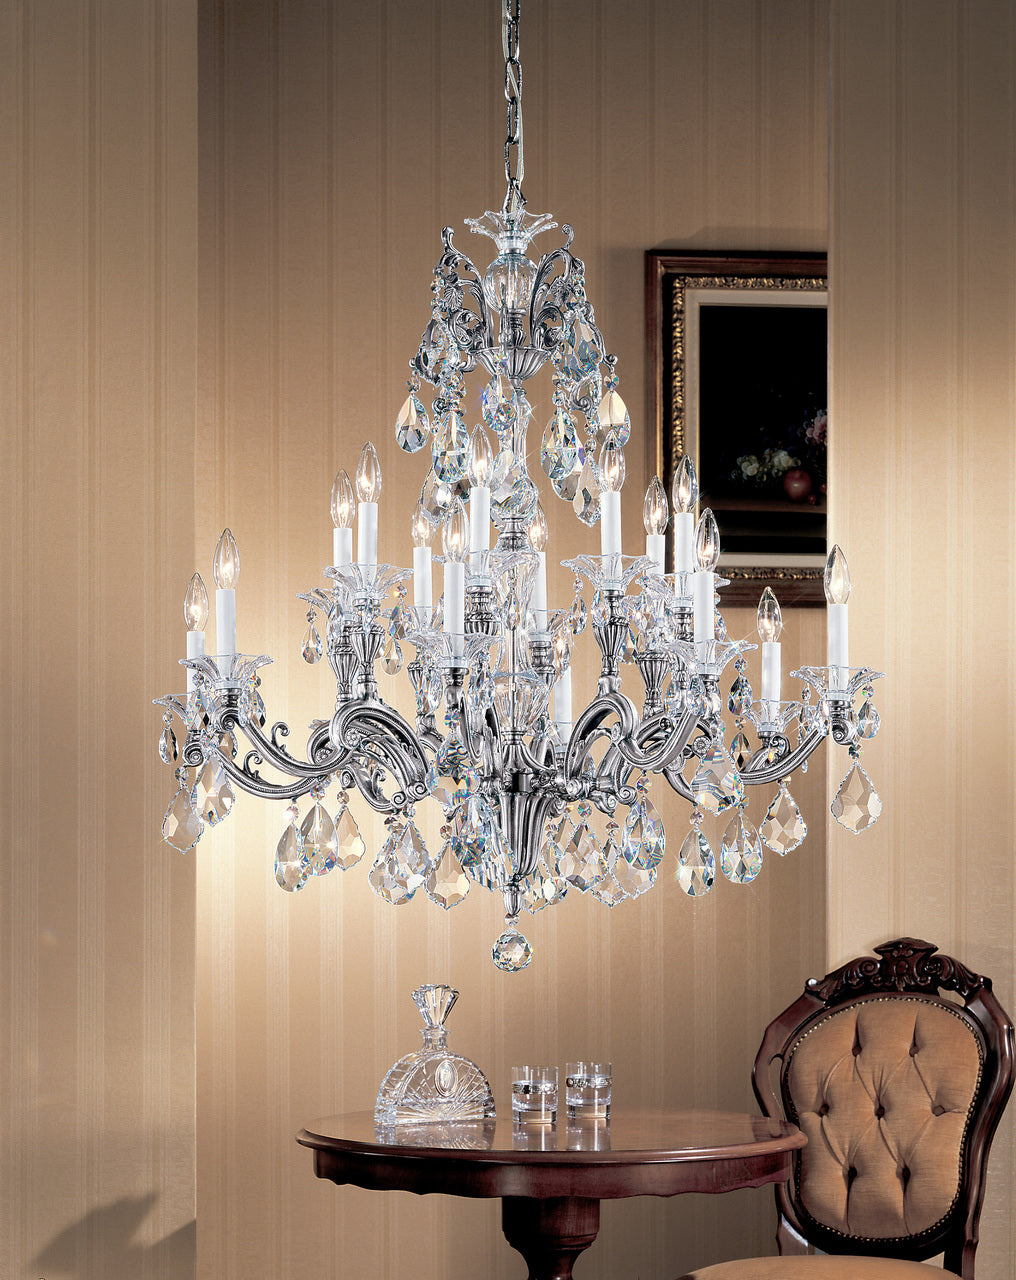 Classic Lighting 57116 RB IRC Via Firenze Crystal Chandelier in Roman Bronze (Imported from Spain)